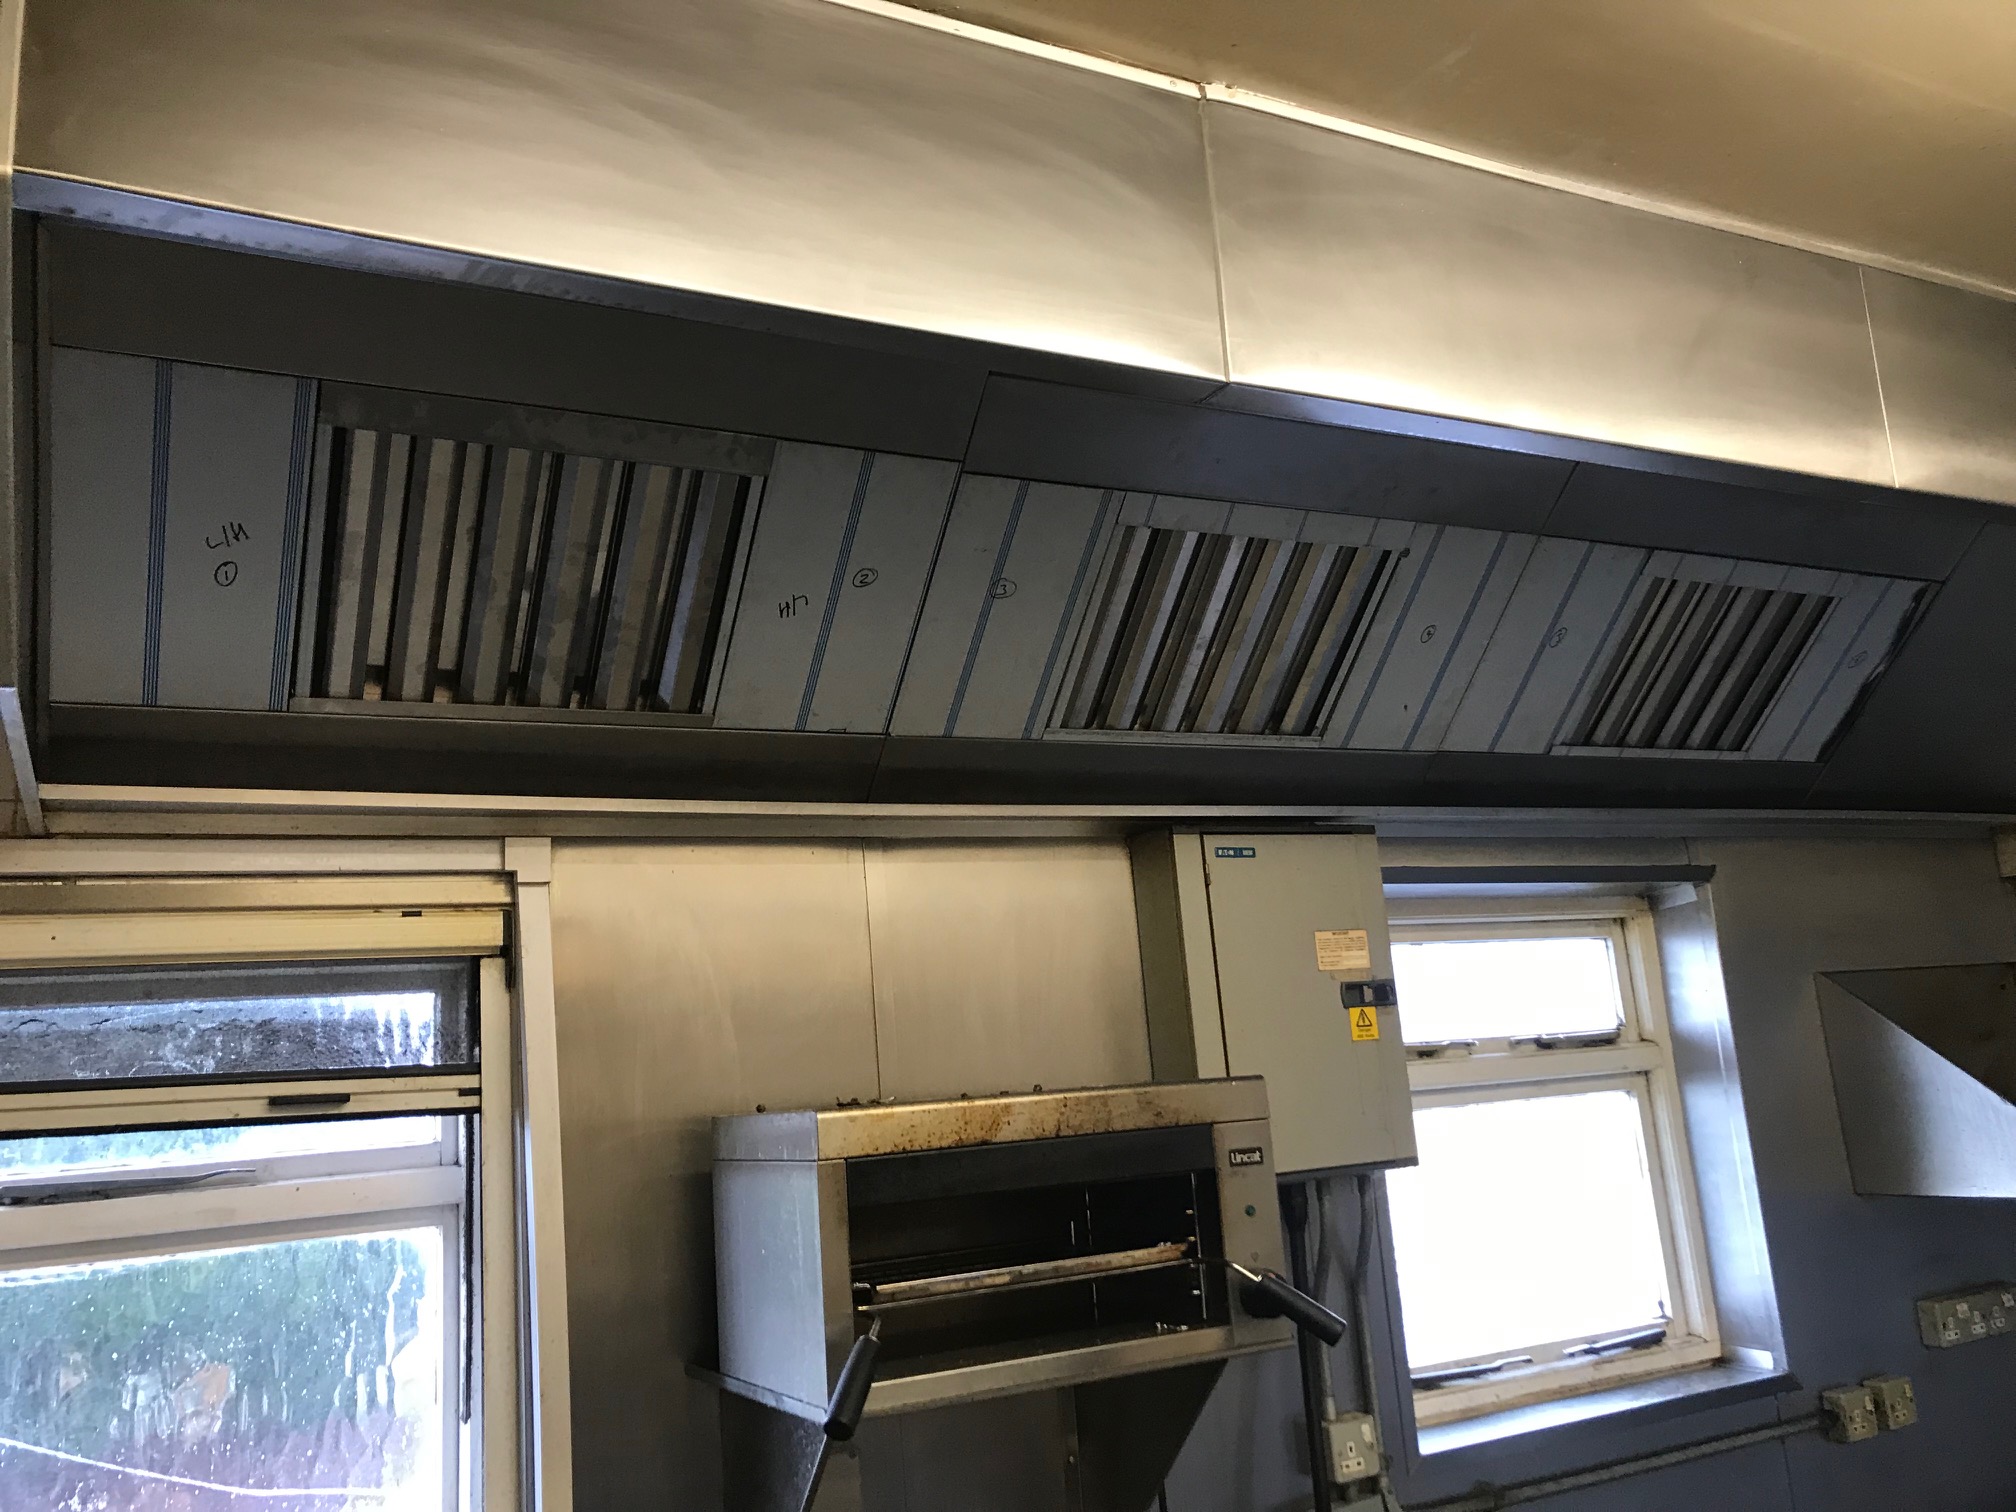 Kitchen canopy baffle filters